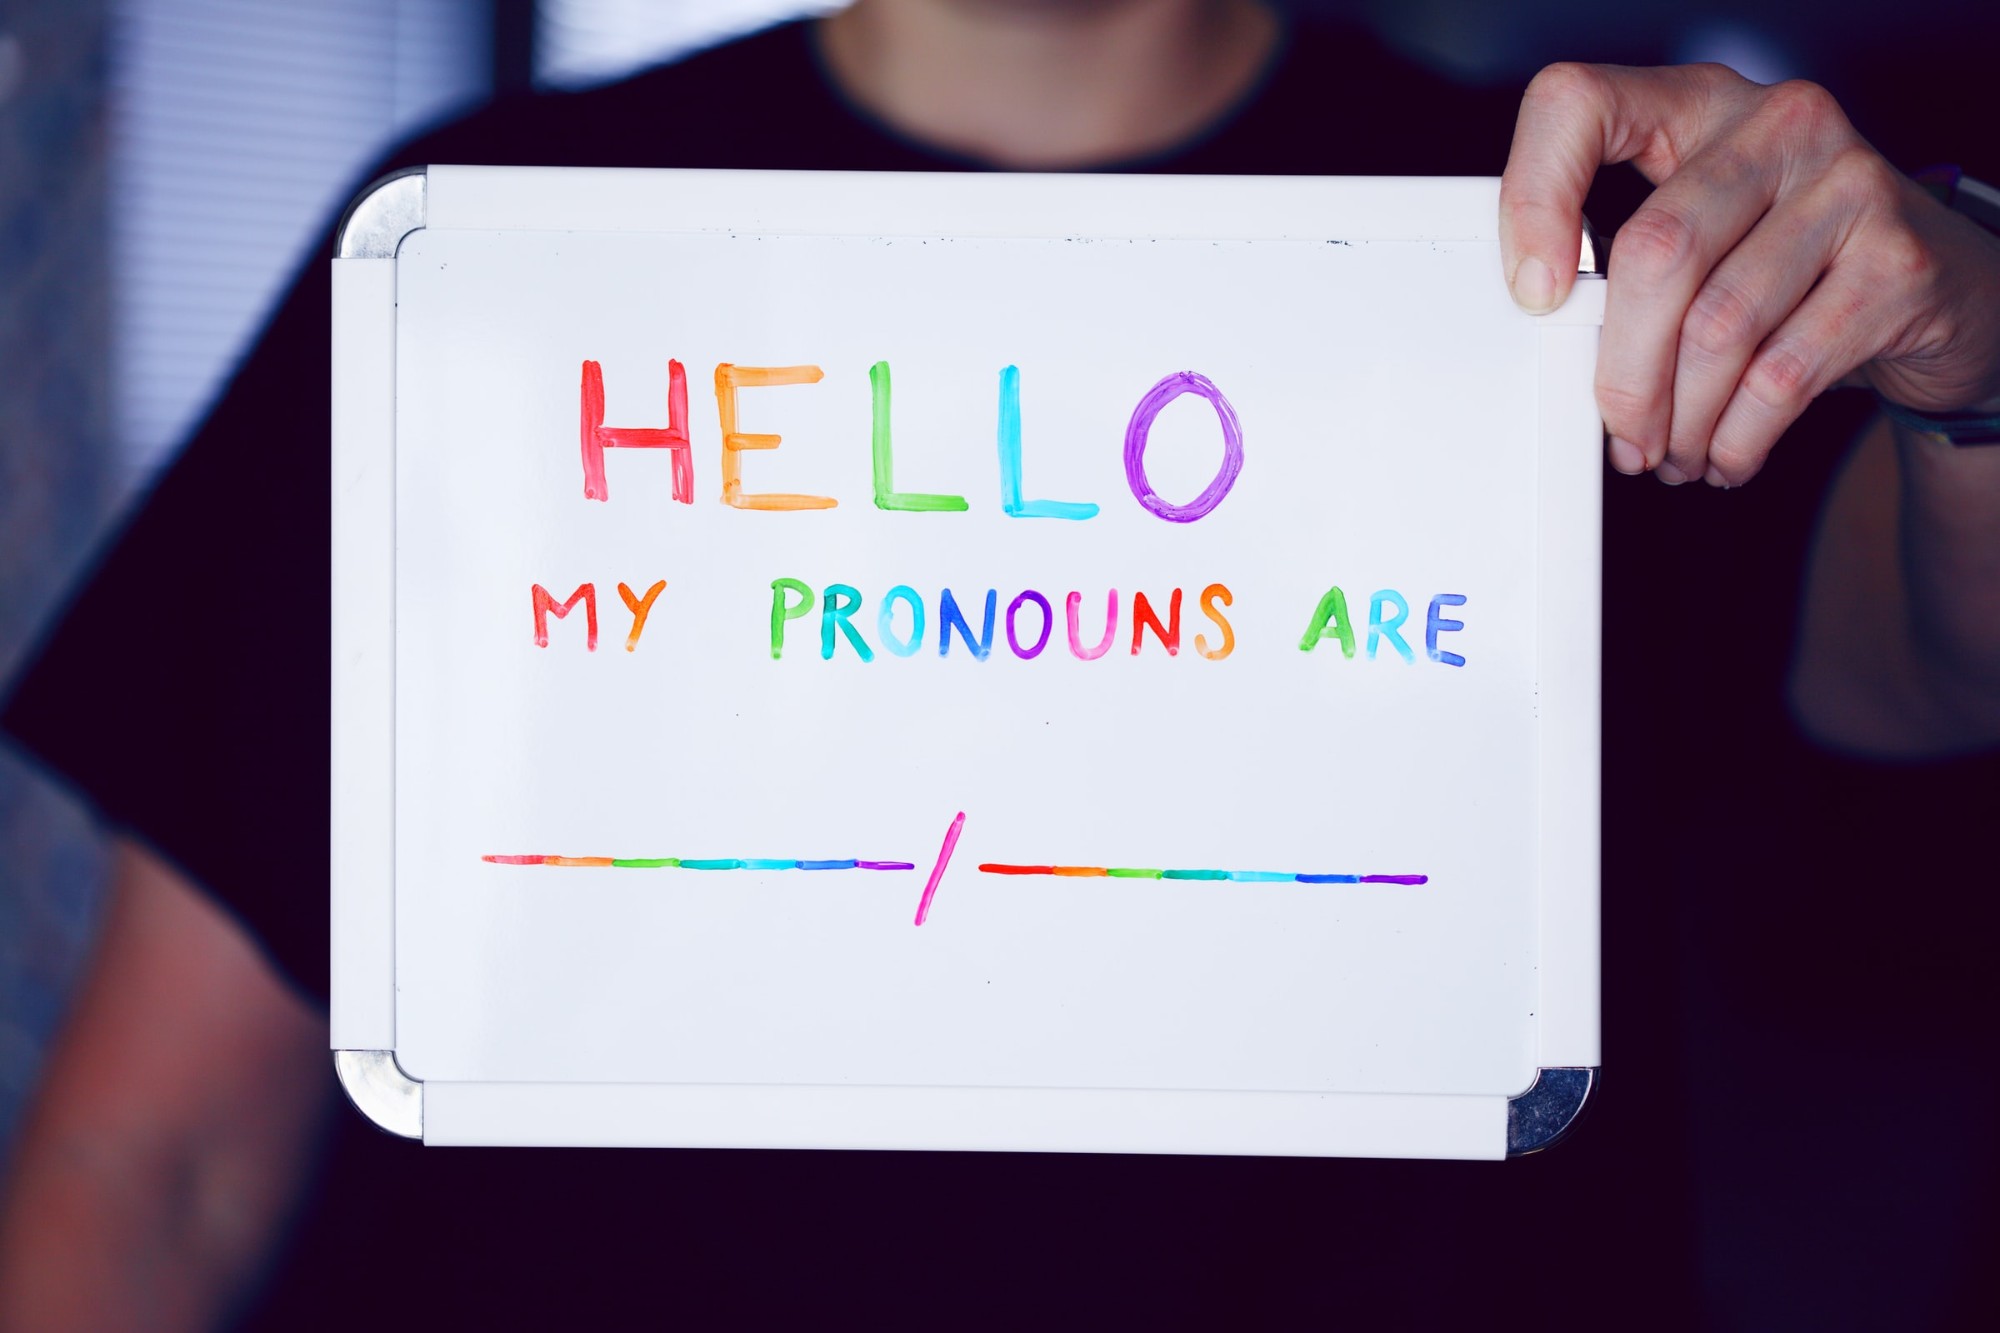 A person holding up a whiteboard that says "Hello my pronouns are"